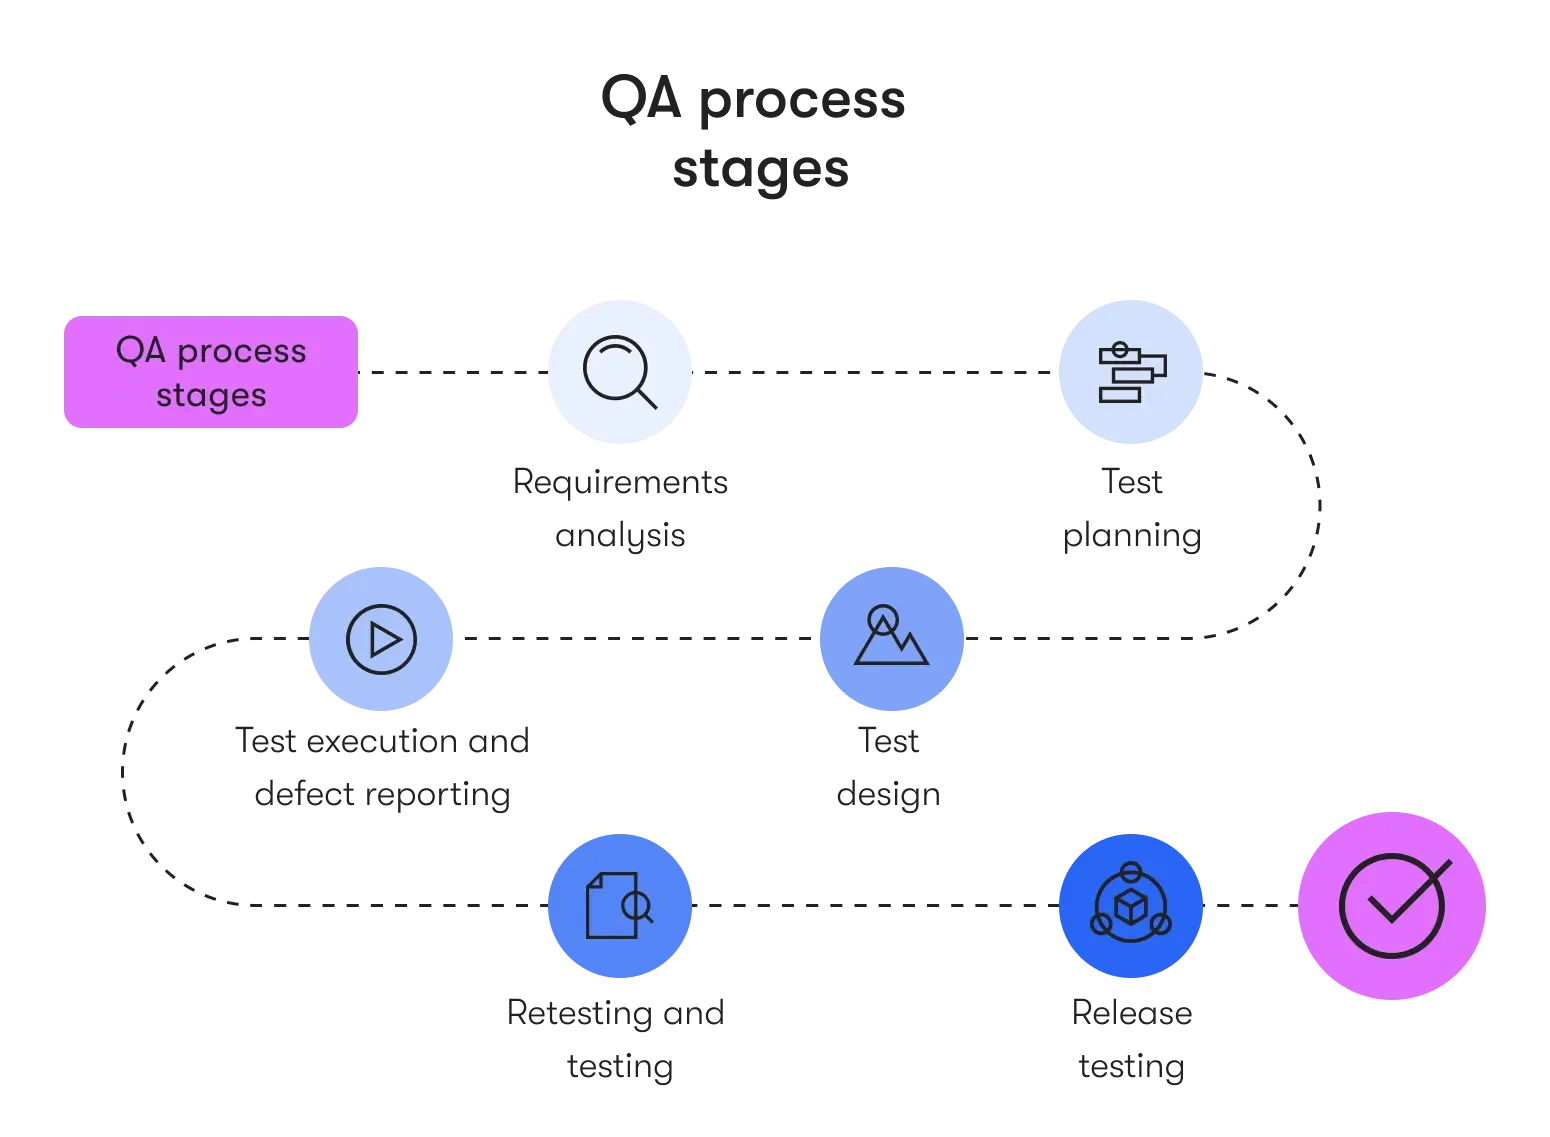 how to improve the QA process: sequence of stages